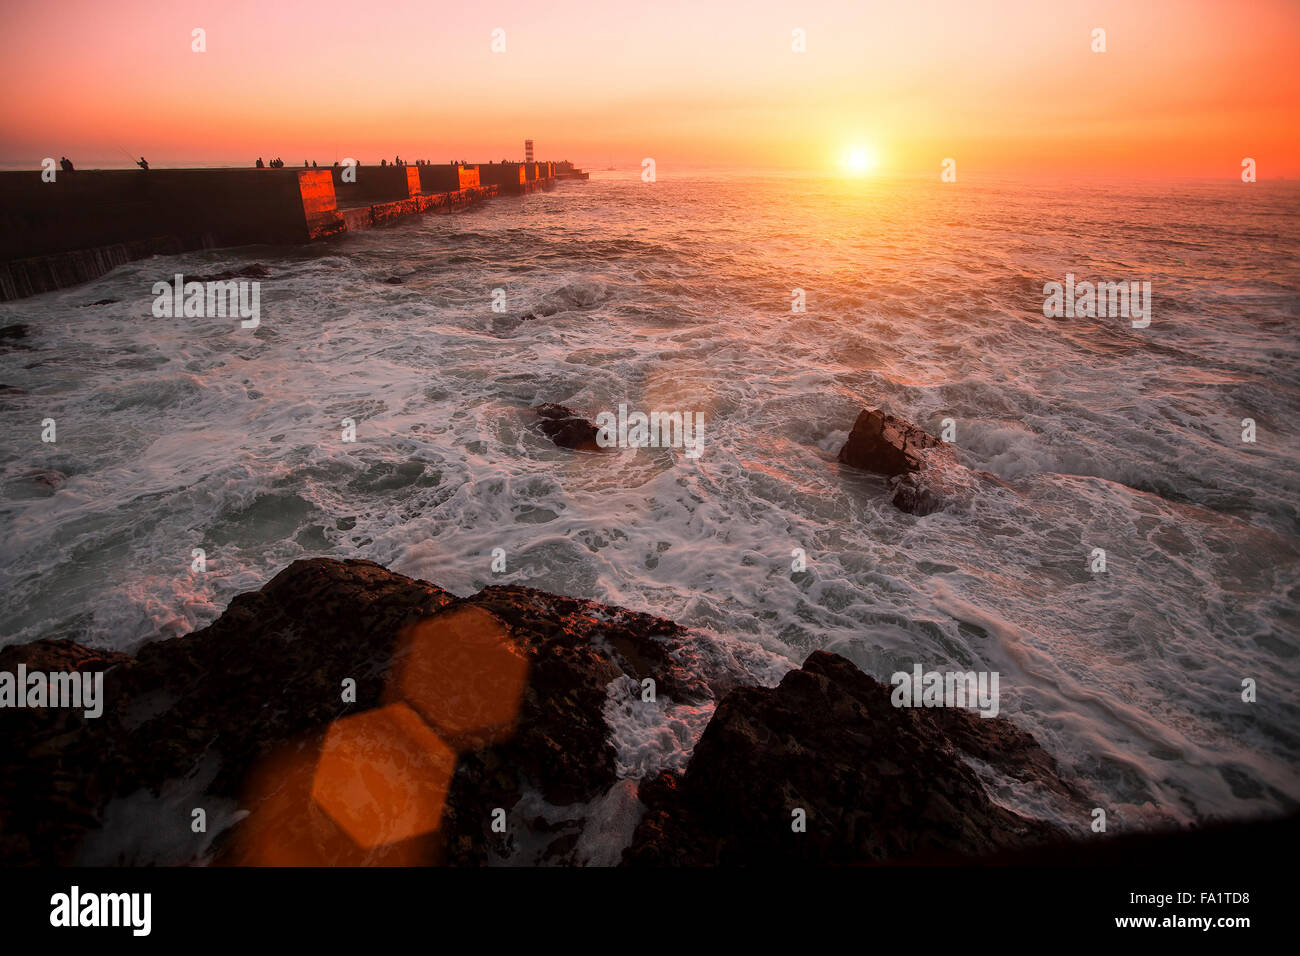 Pier in the Ocean, during amazing bloody sunset. Stock Photo